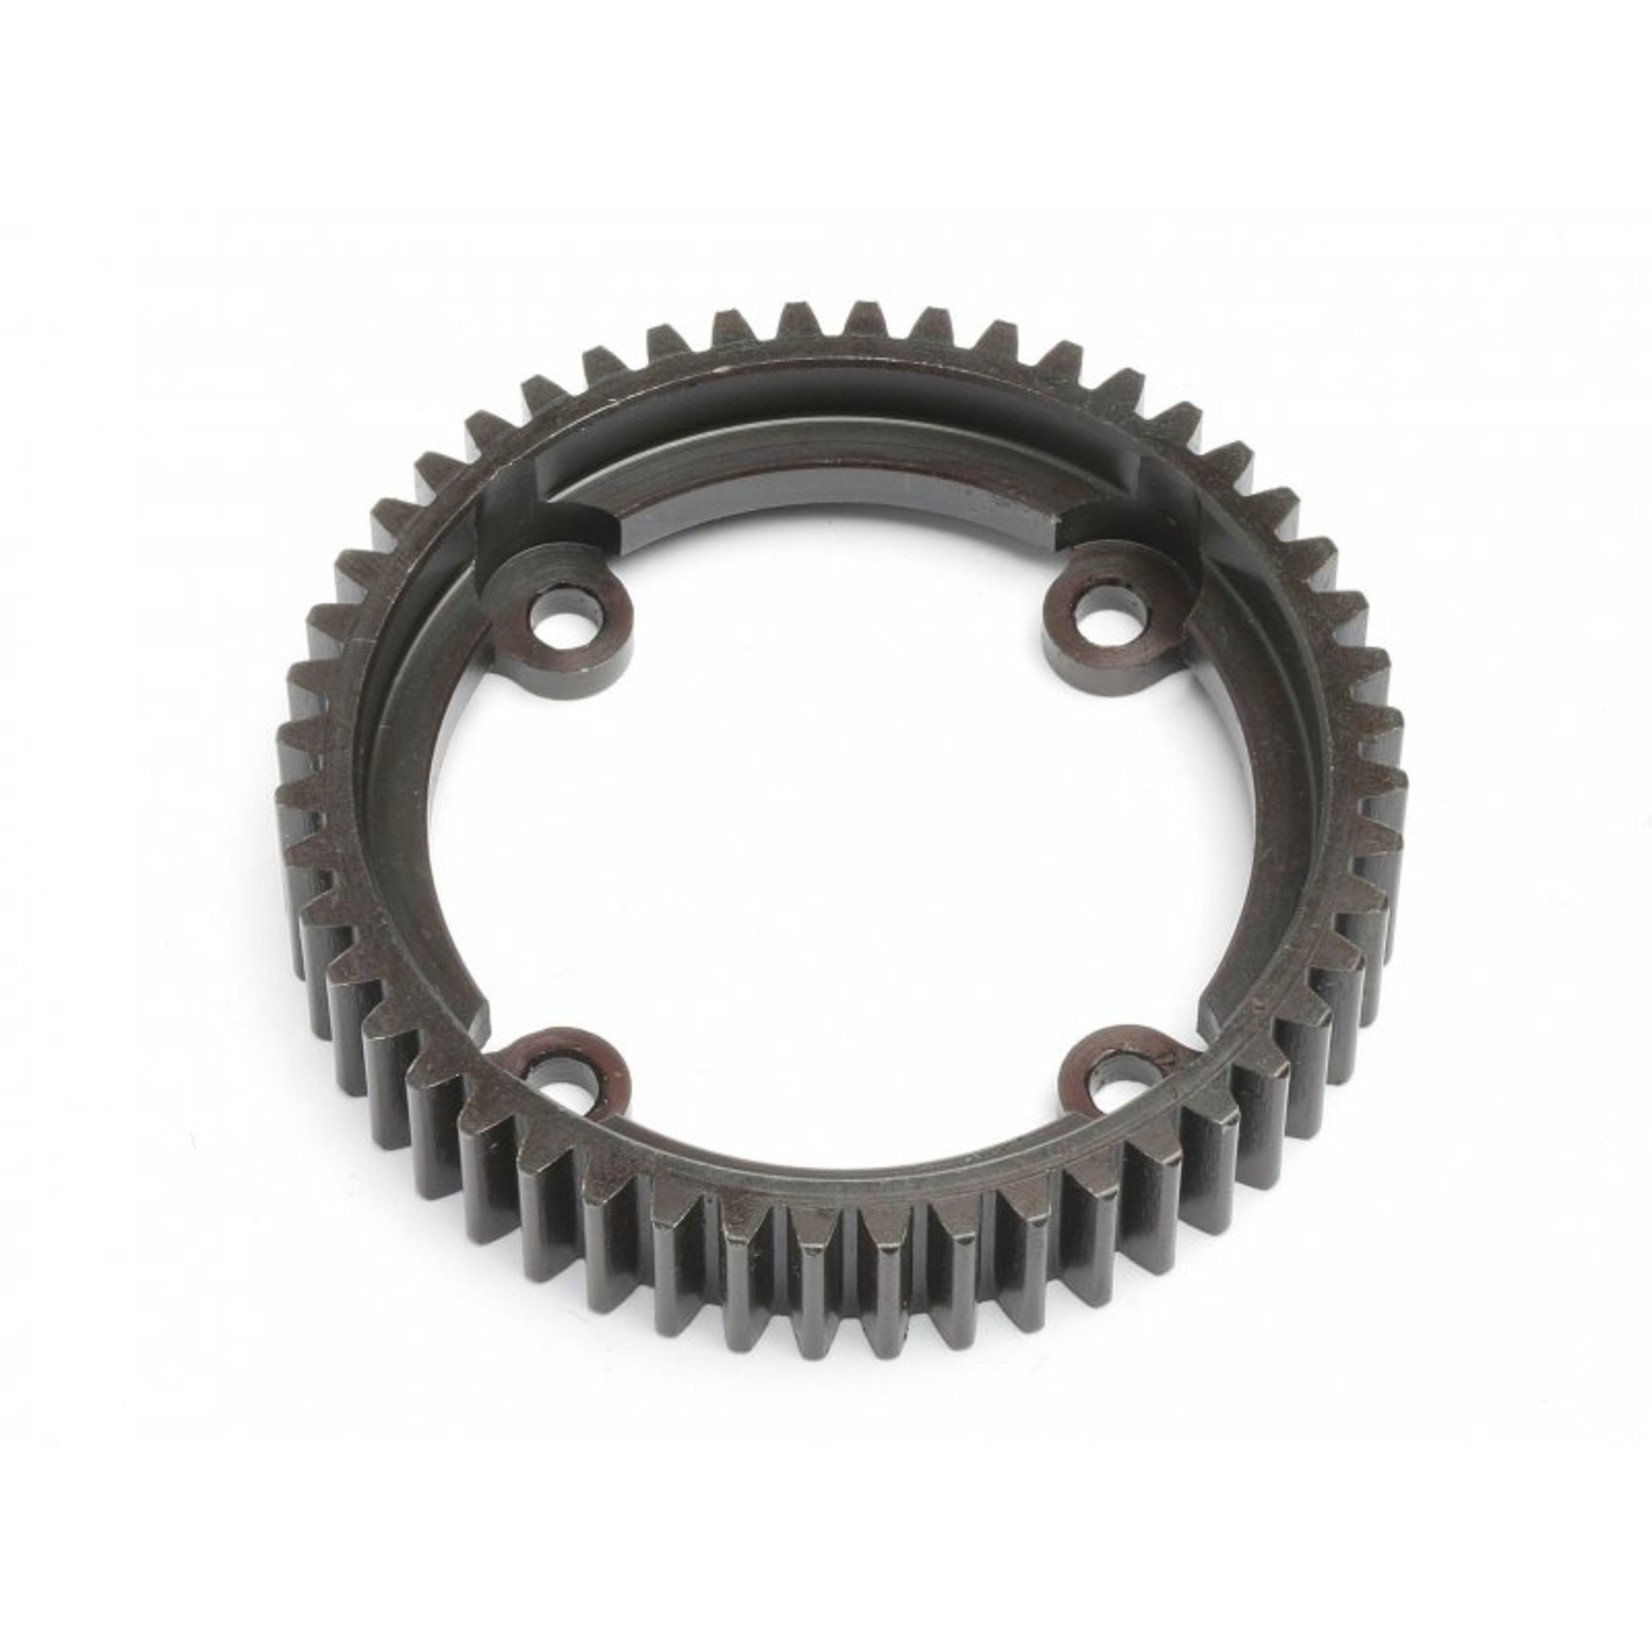 HPI Racing Heavy Duty Differential Gear 48 Tooth Baja 5